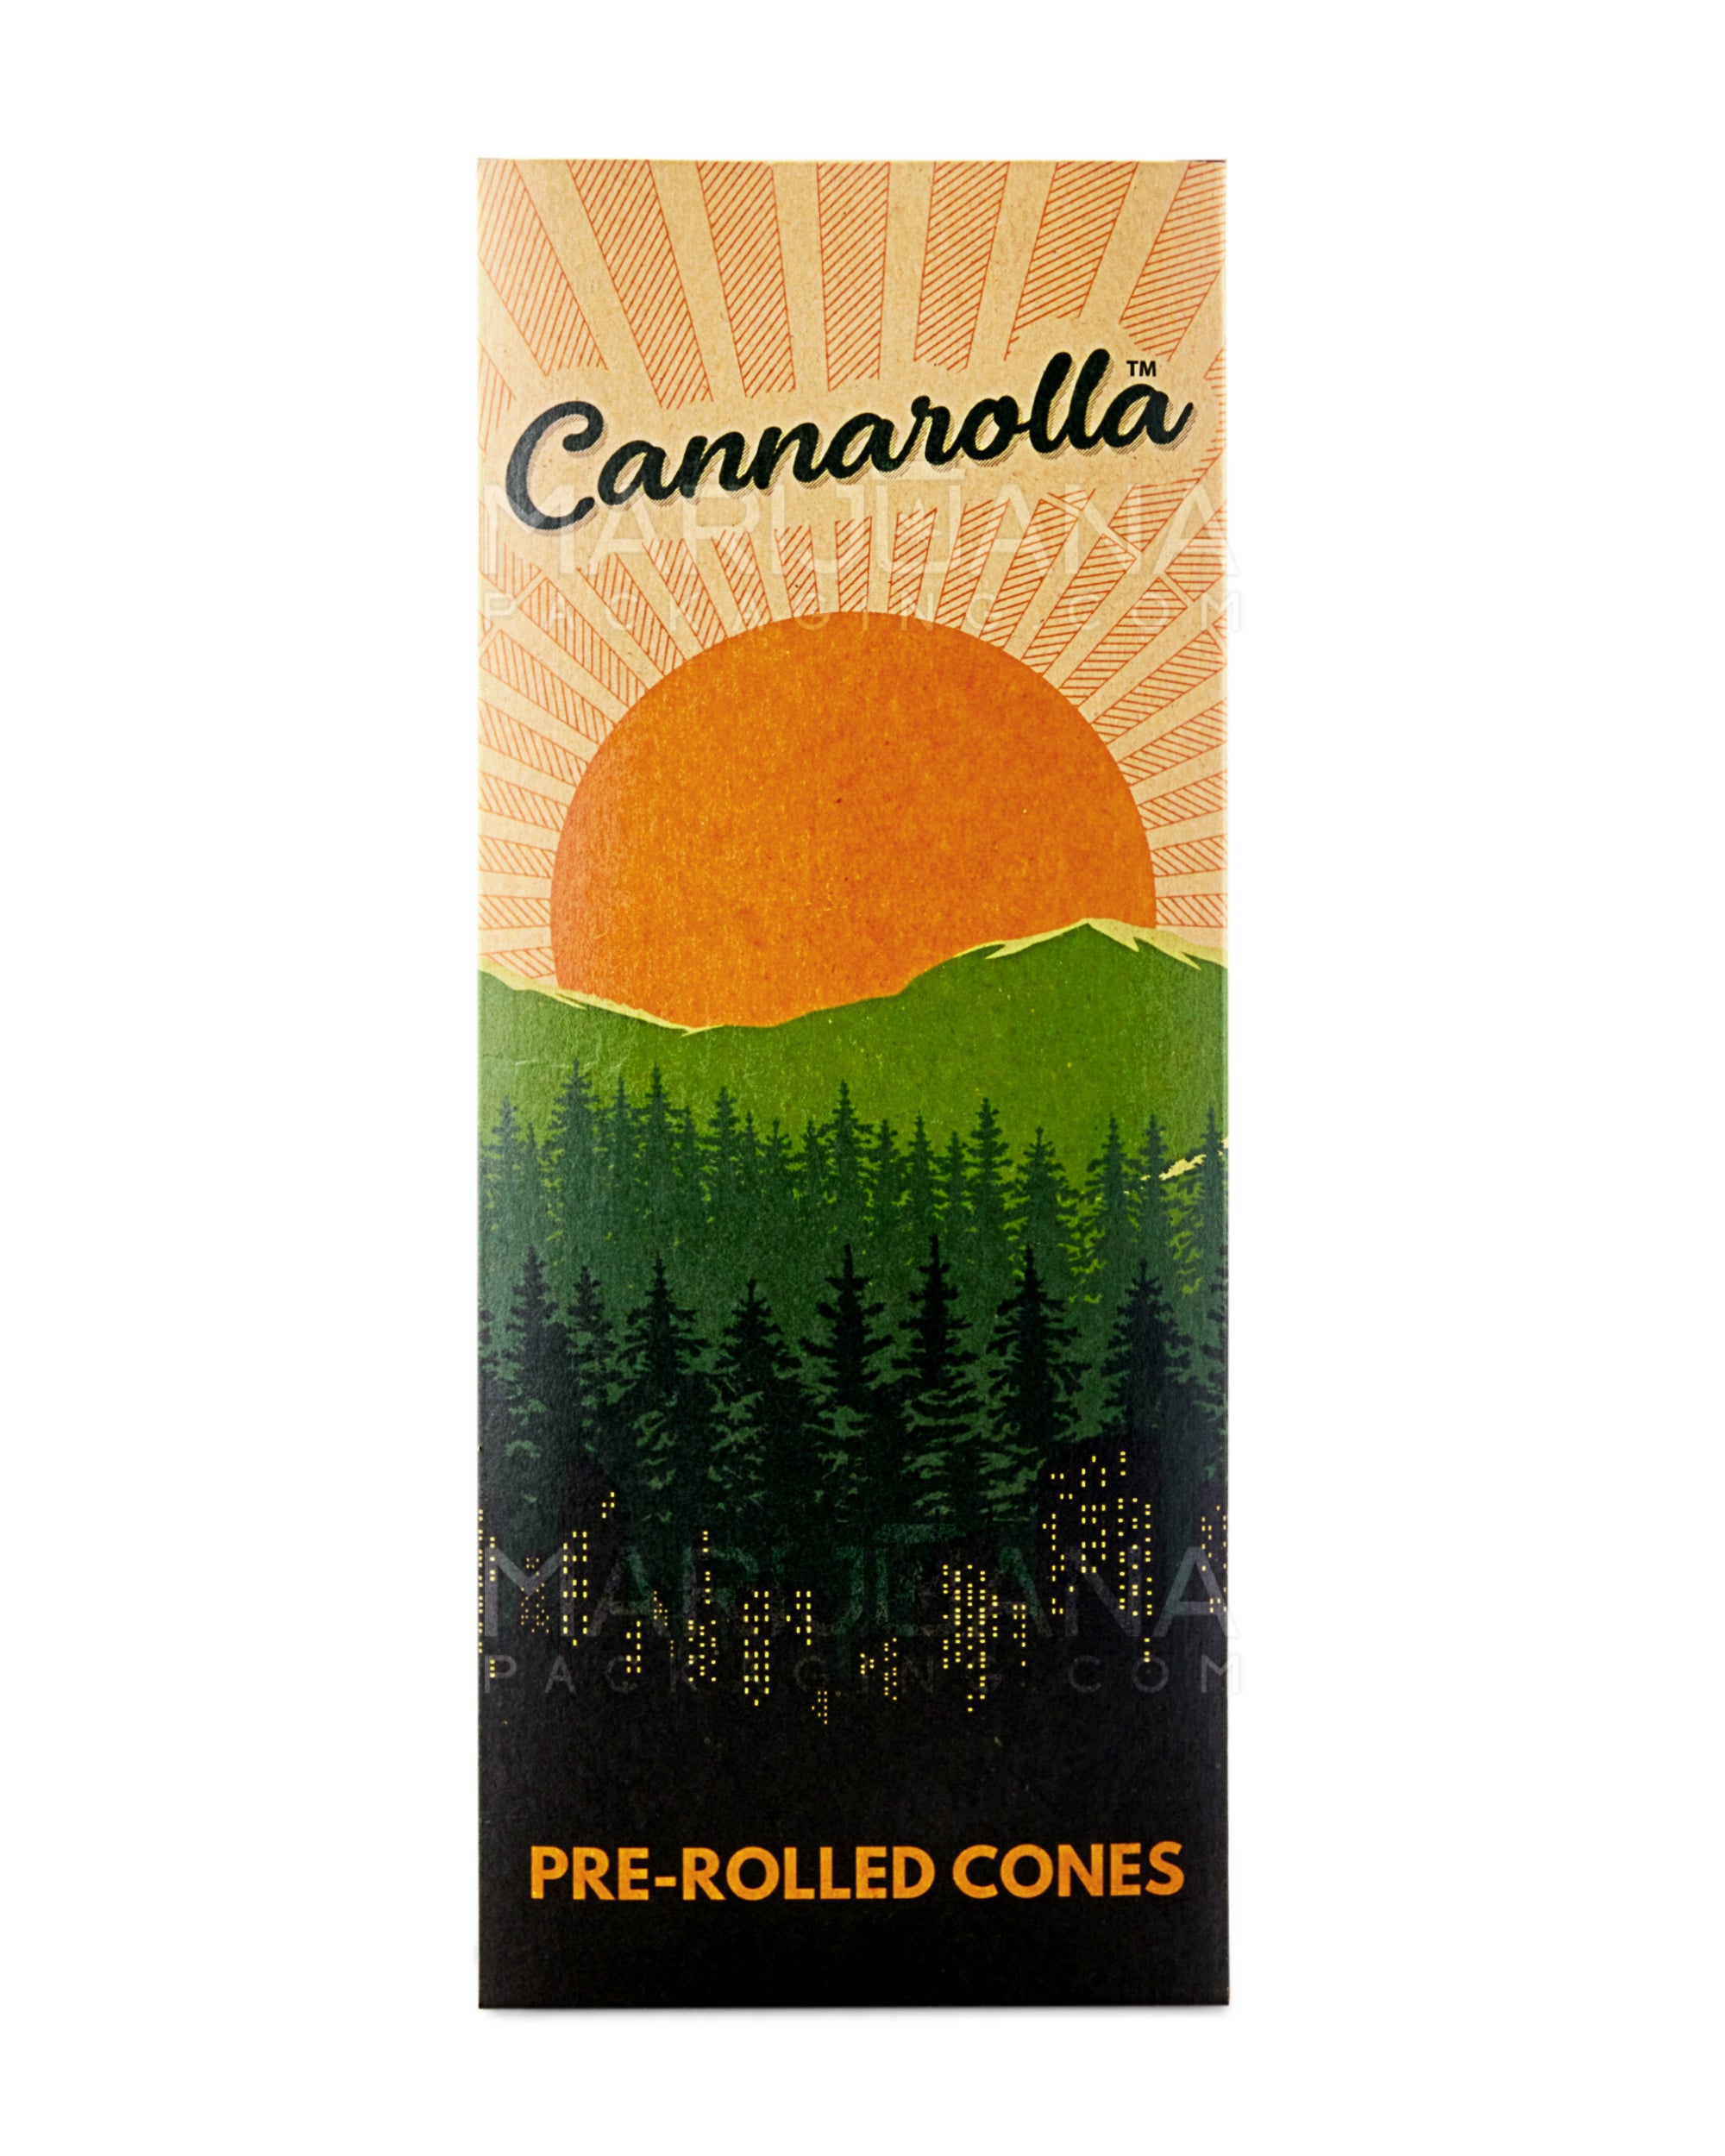 CANNAROLLA | 98 Special Size Pre-Rolled Cones | 98mm - White Paper - 800 Count - 5